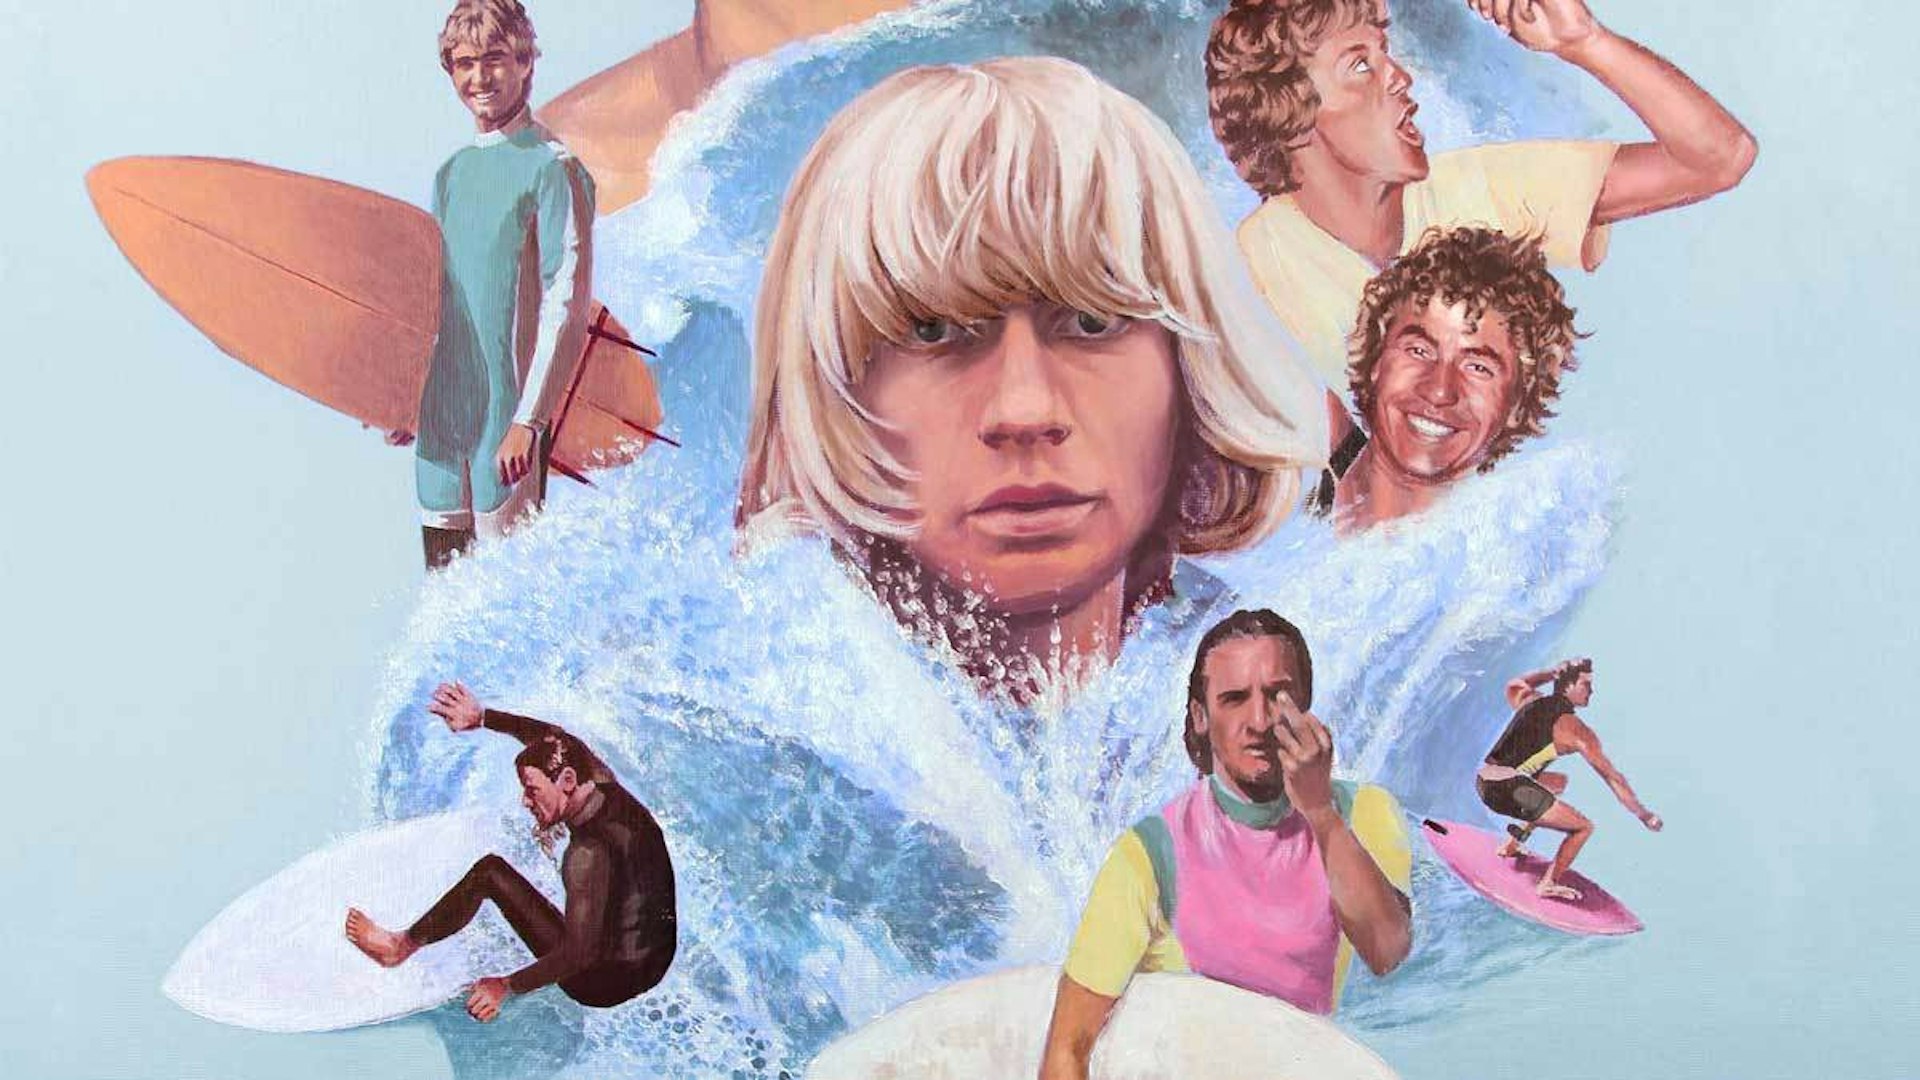 What to catch at this year’s Surf and Skate Film Festival